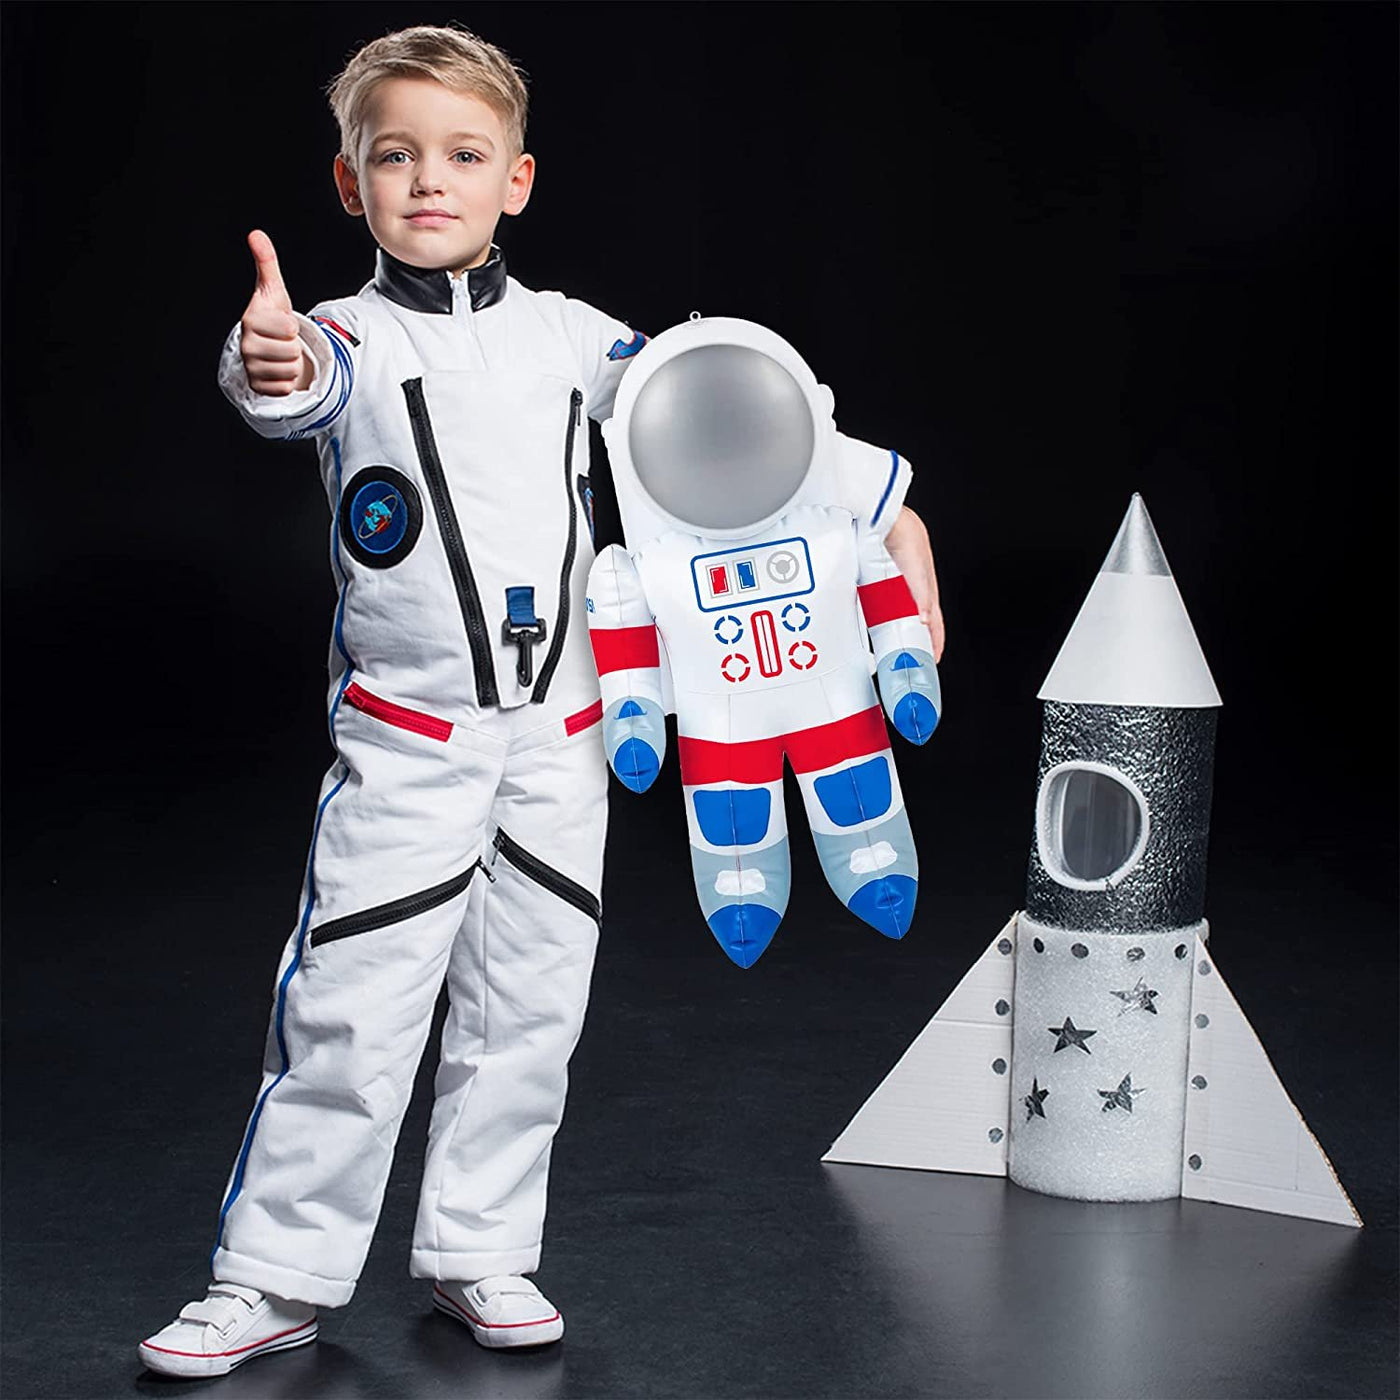 Inflatable Astronaut Toys, 22" Long Party Inflatables, Set of 2